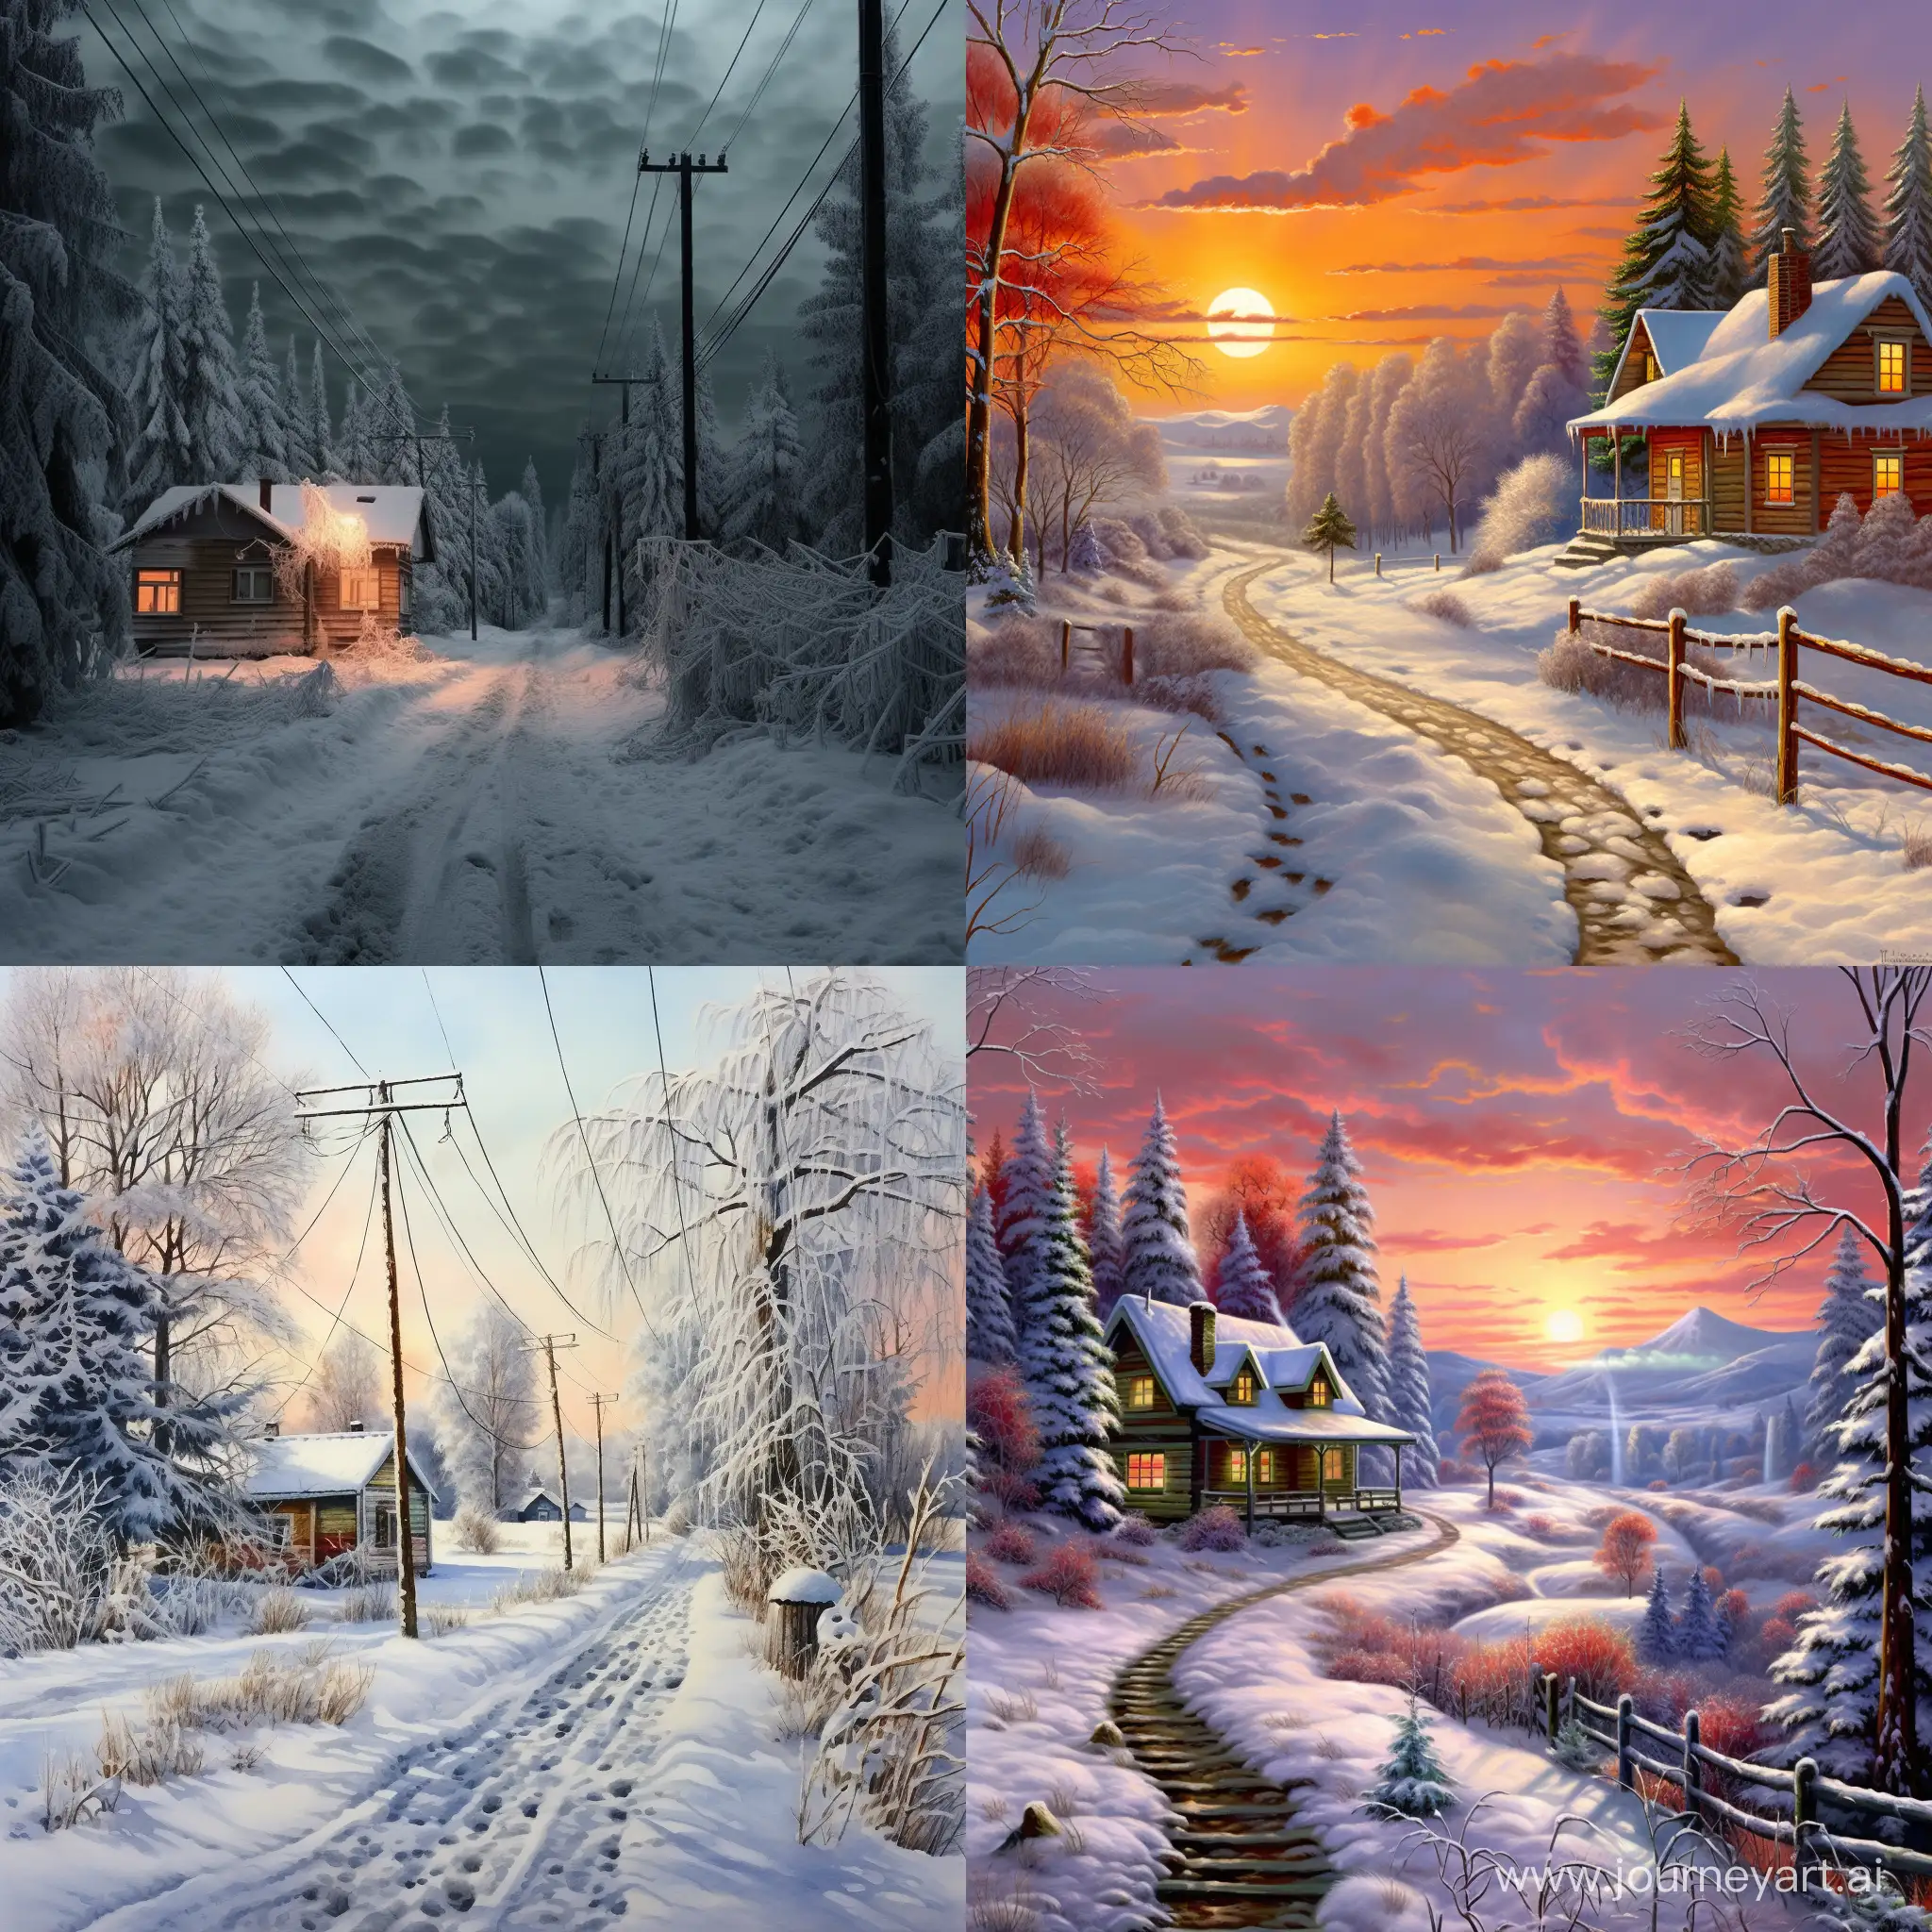 Idyllic-Winter-Village-Landscape-with-Cozy-Cottage-and-Snowcovered-Forest